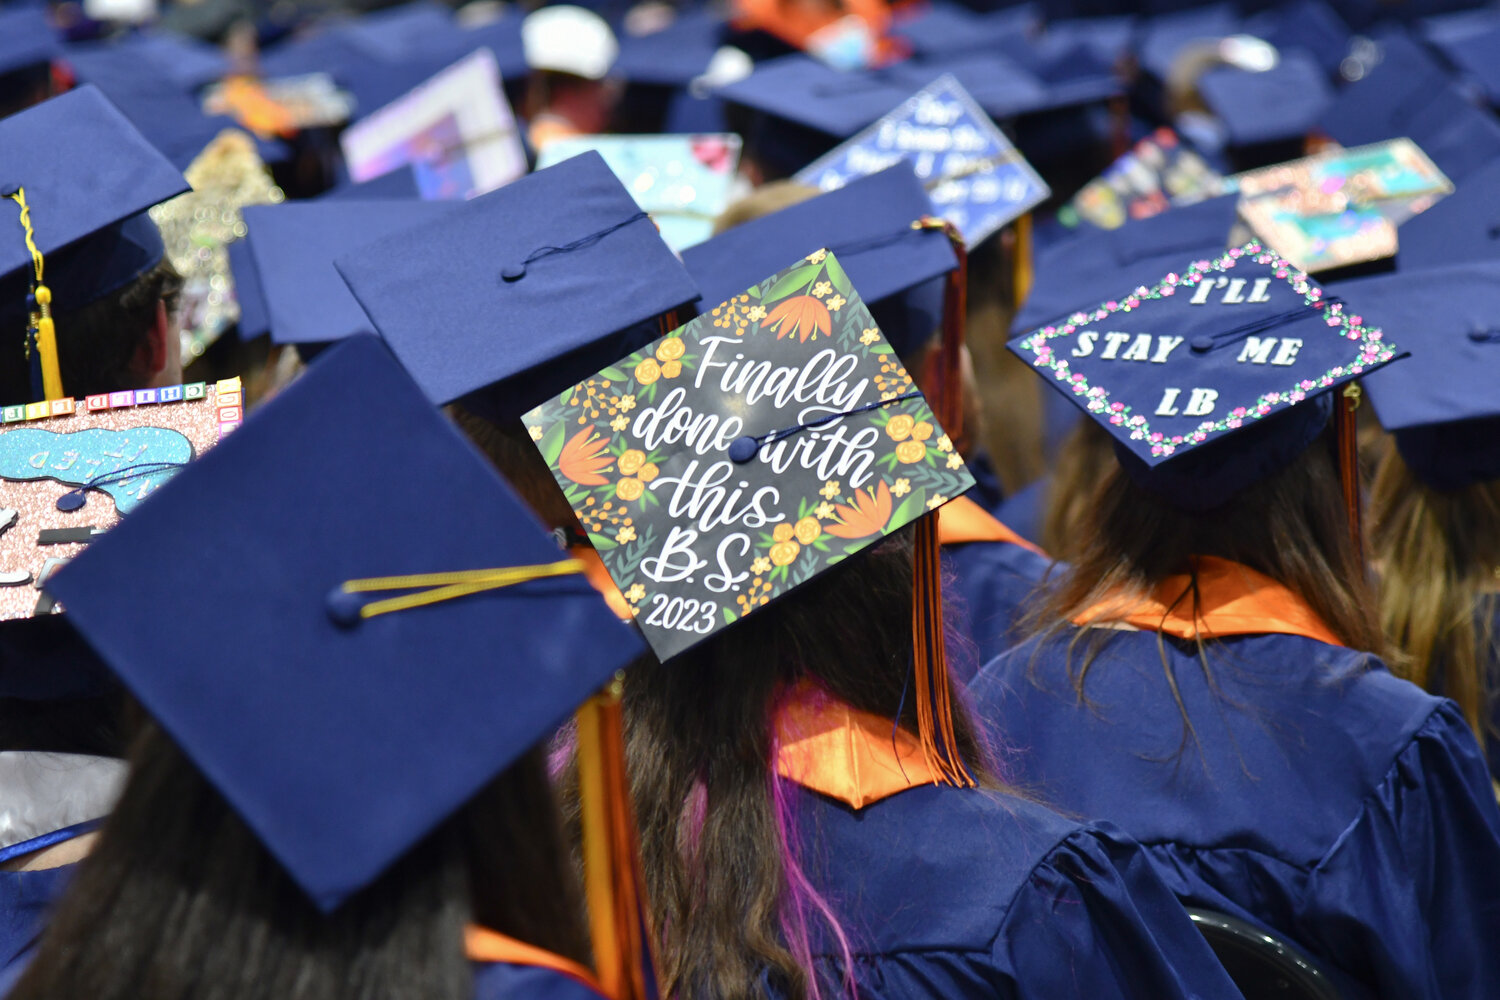 Among the sea of graduation caps at Utica University's 74th undergraduate commencement ceremony, many of them showed messages of inspiration and determination, even some tongue-in-cheek statements like "Finally done with this B.S. (bachelor of science)"